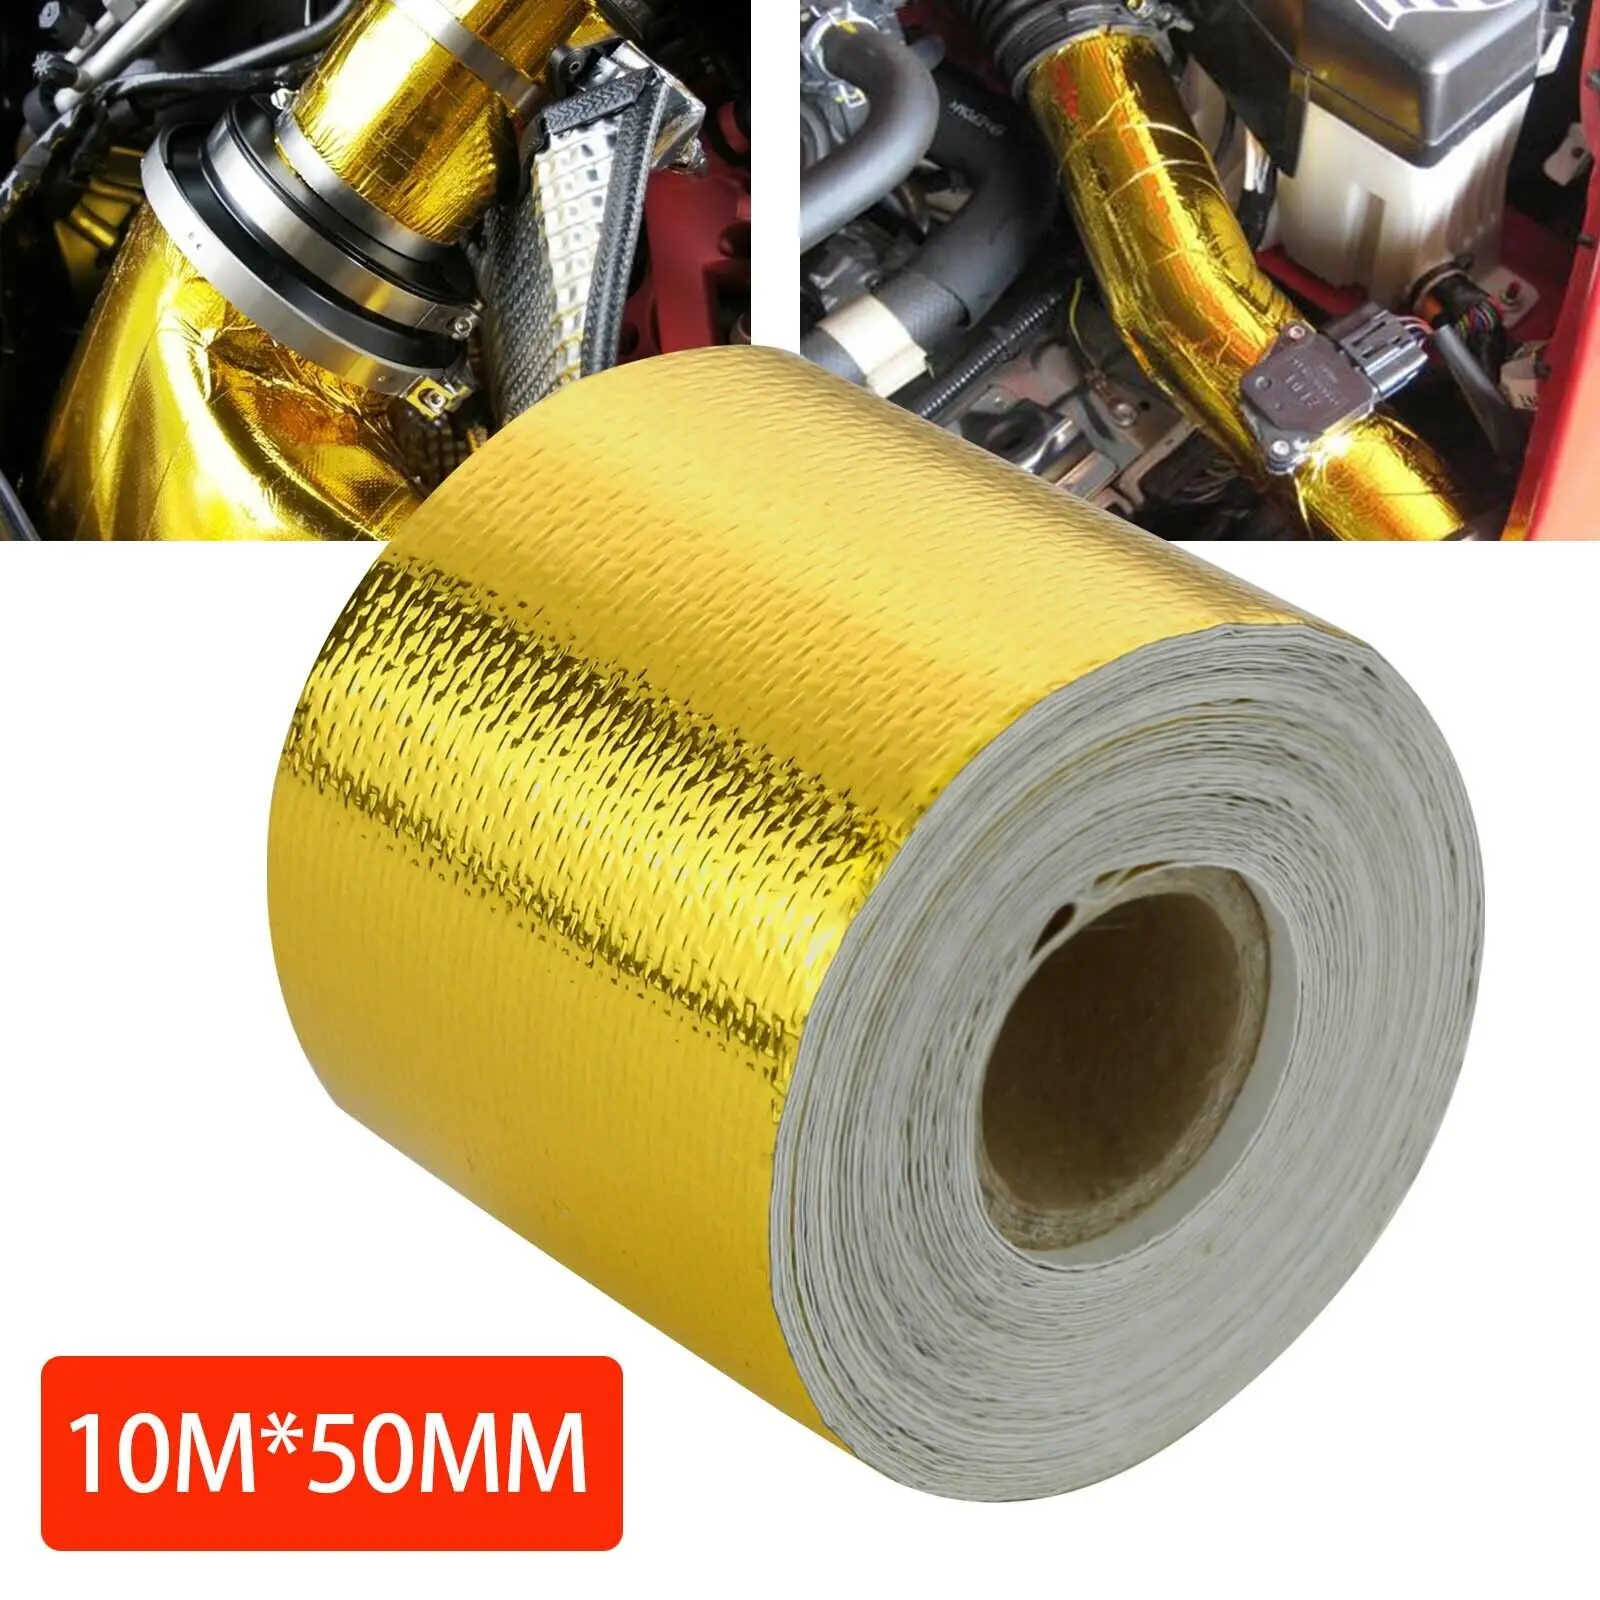 Reflective Self Adhesive Tape Gold/Sliver High Temperature Heat Insulation Shield Wrap Tape Bandage 50mm x 10M Roll Universal